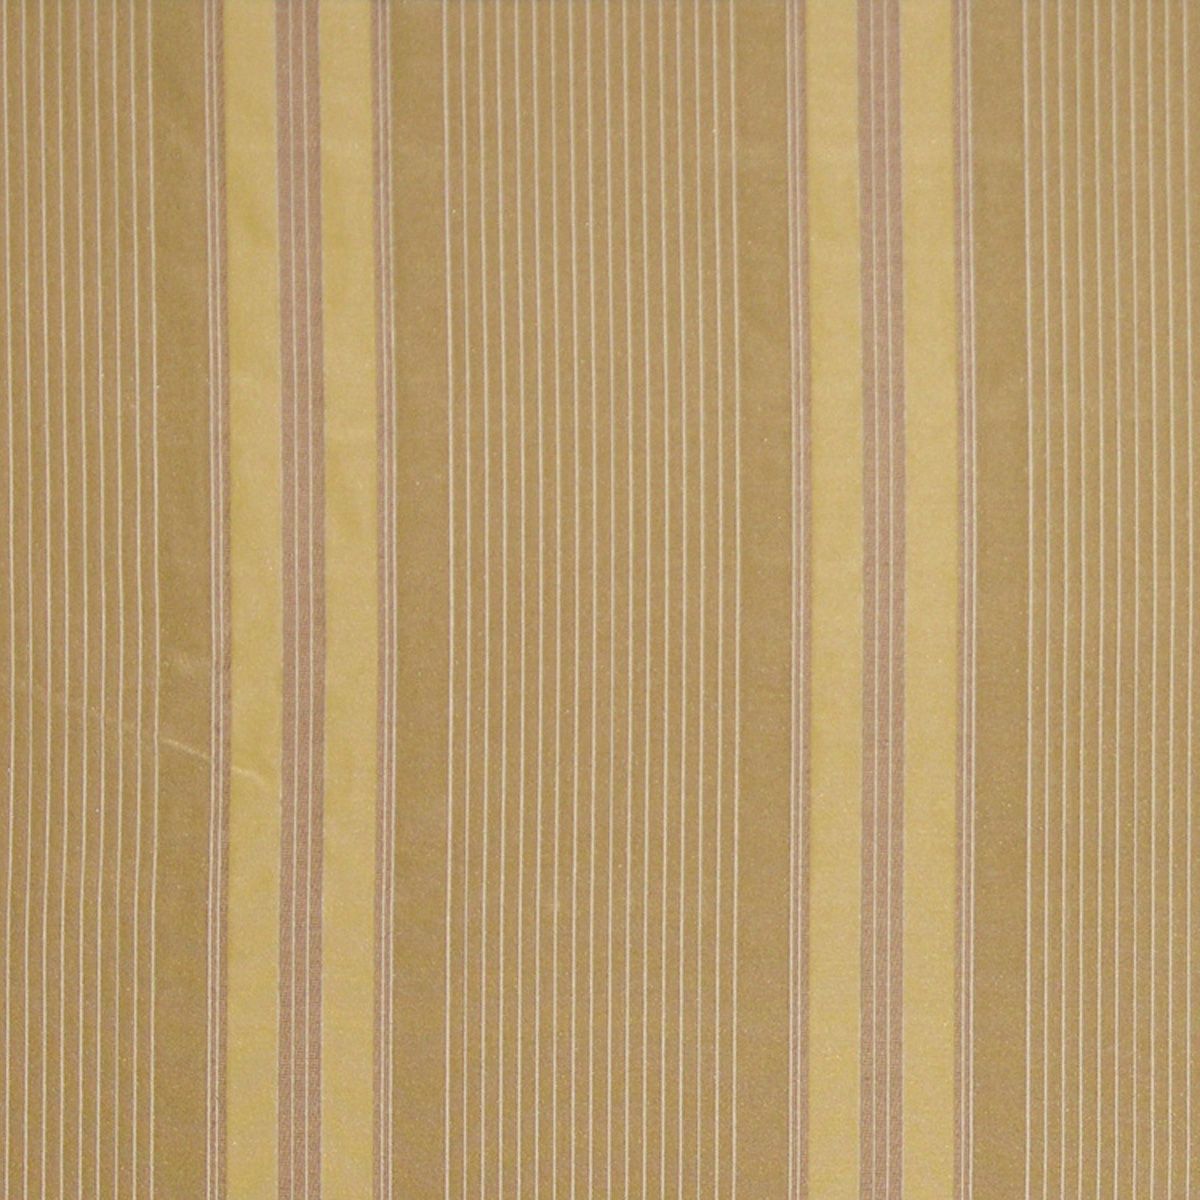 Malabar Stripe fabric in marigold color - pattern number HB 00071440 - by Scalamandre in the Old World Weavers collection